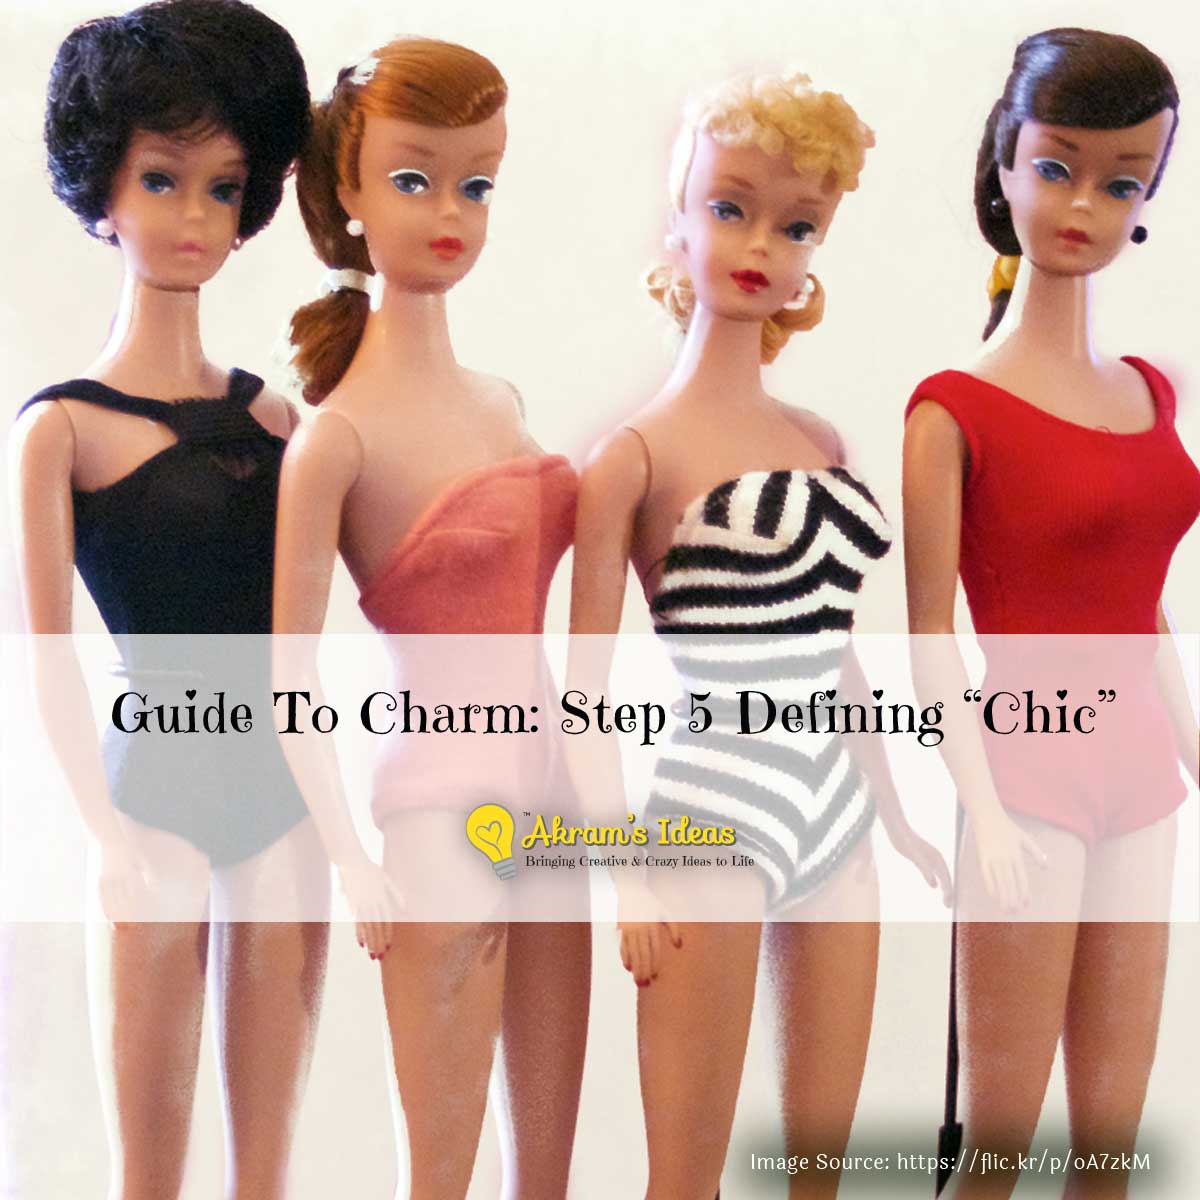 Akram's Ideas : Guide To Charm: Step 5 Defining “Chic”